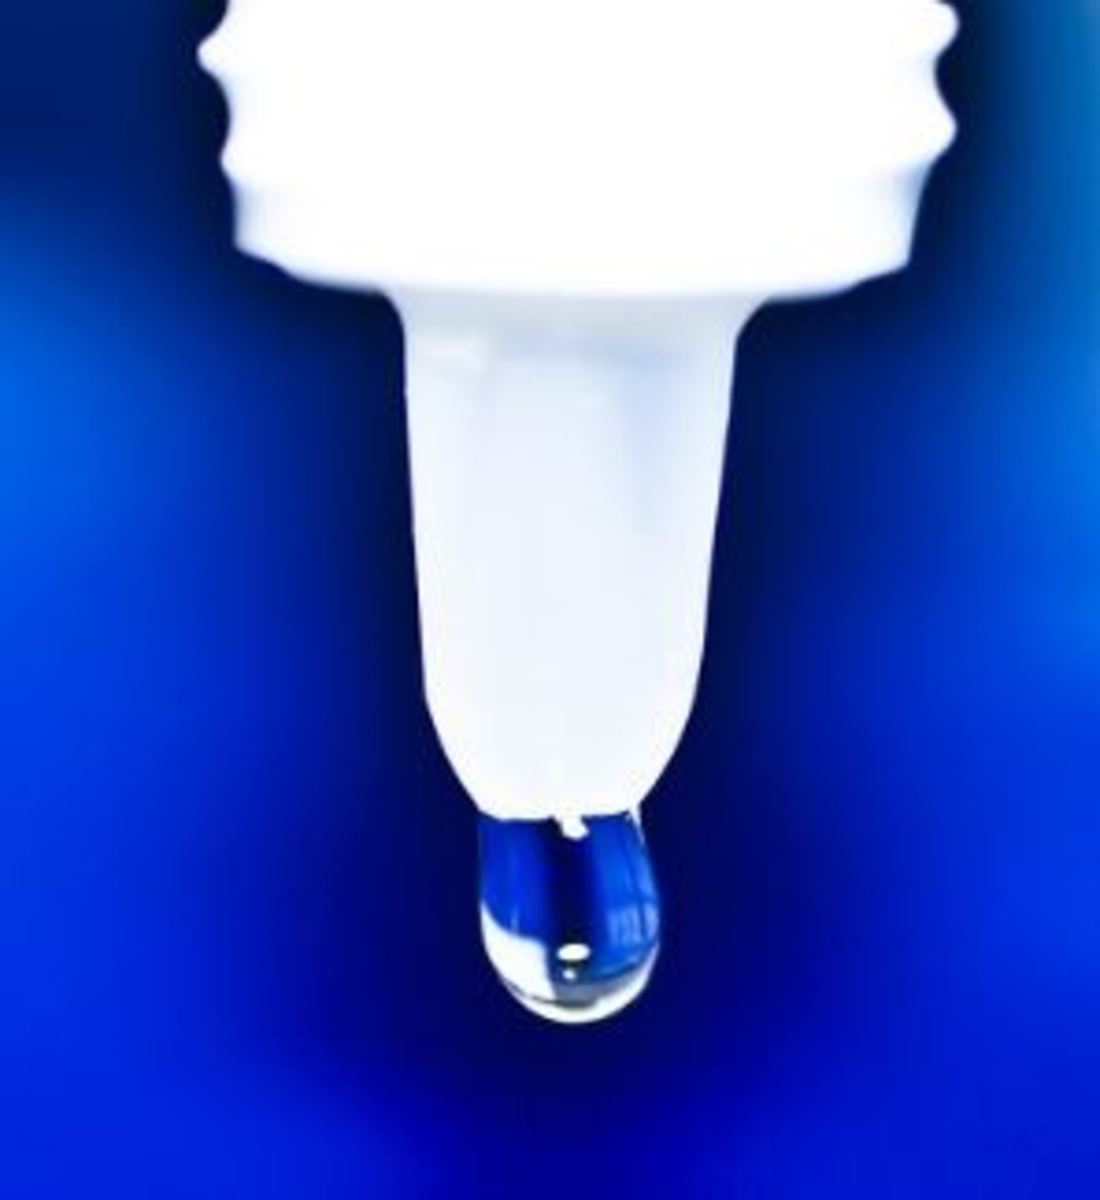 Special eye drops can help the fluids flow